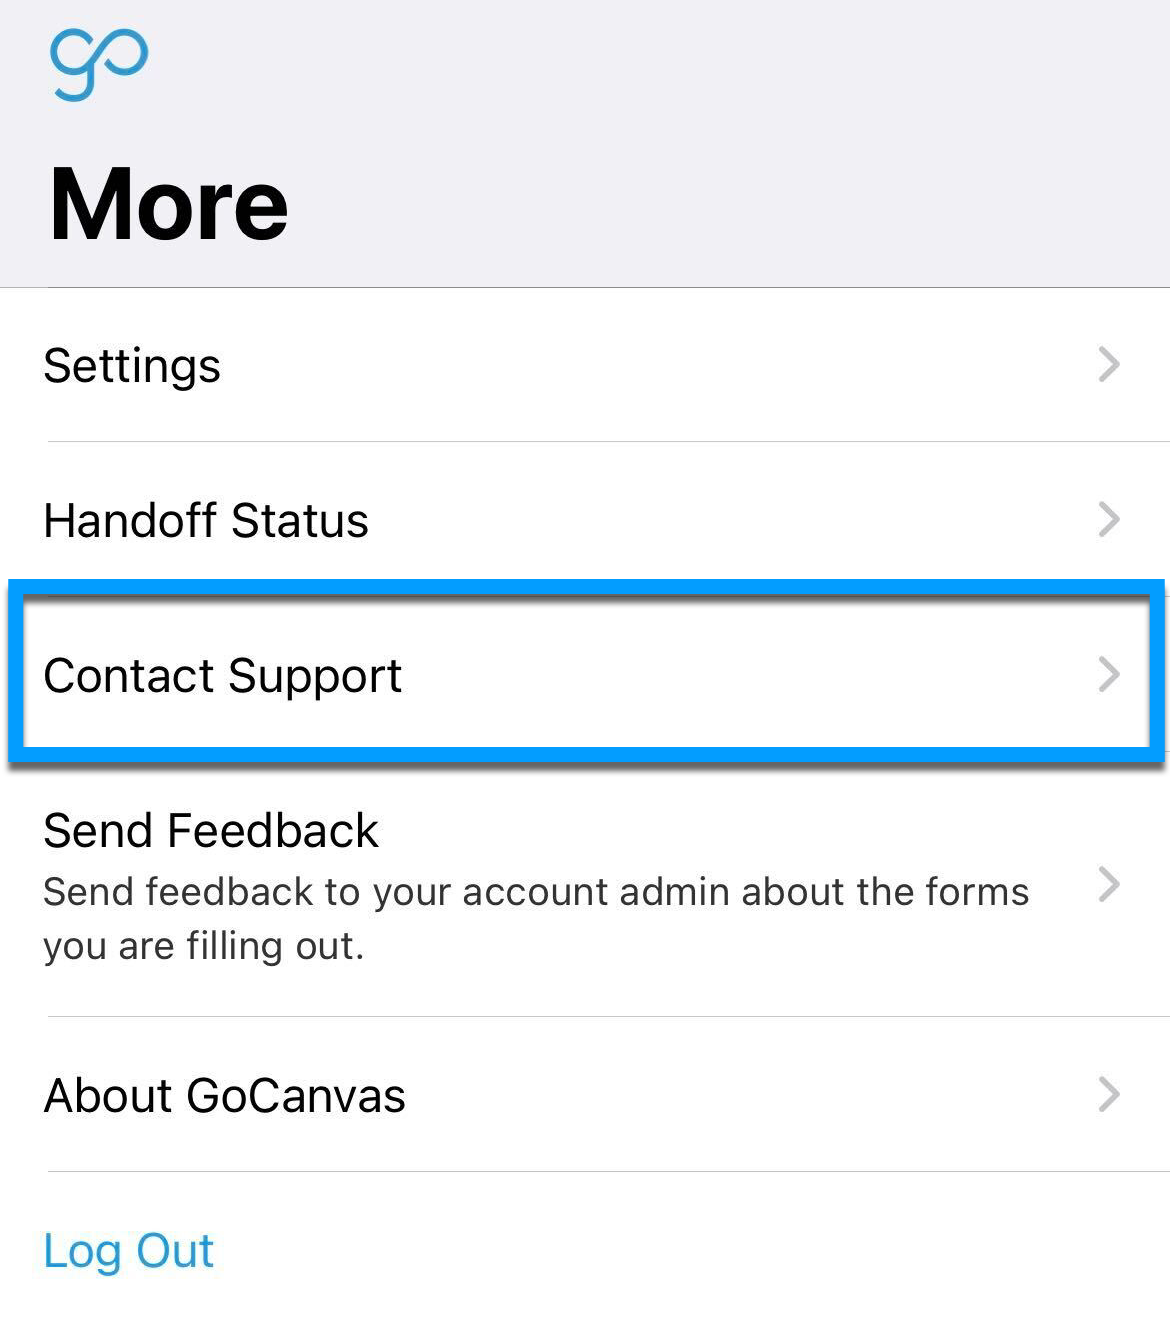 iOS_More_Contact Support.png